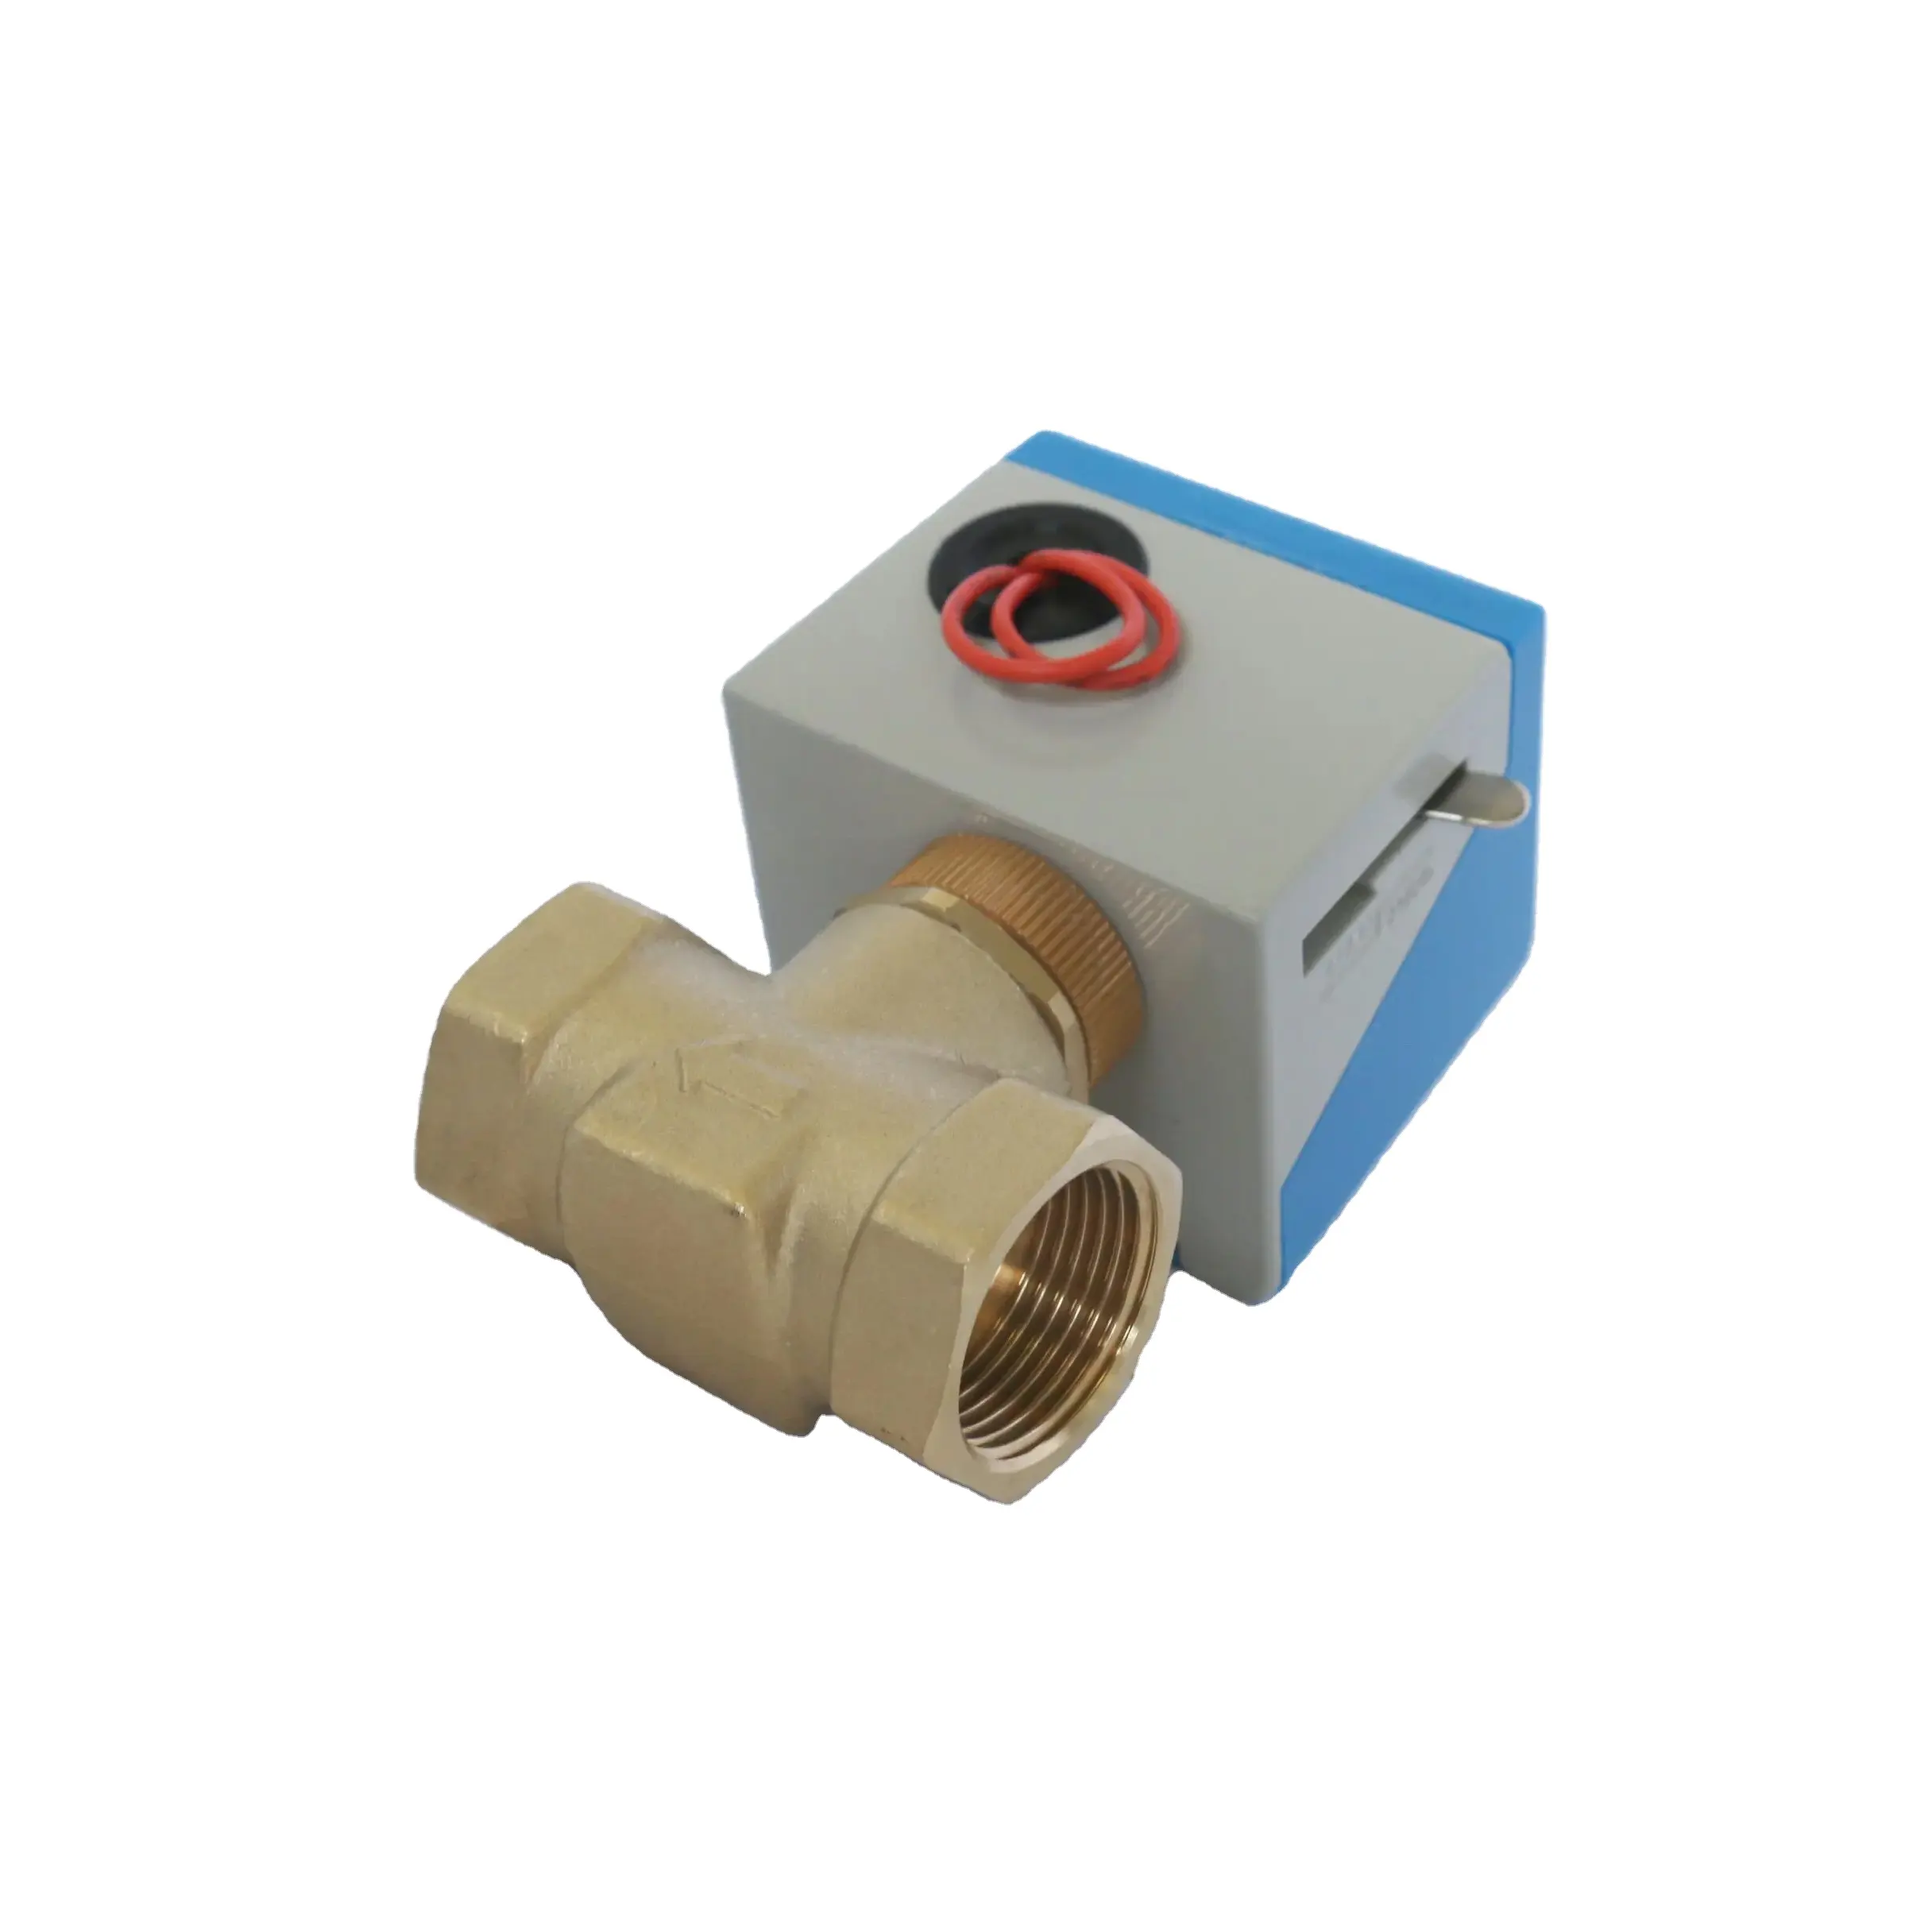 Sixi Valve Factory Production 2 Way Electric Stop Valve For Water Flow Regulation Cut-off DN25 220VAC 24VAC 110VAC